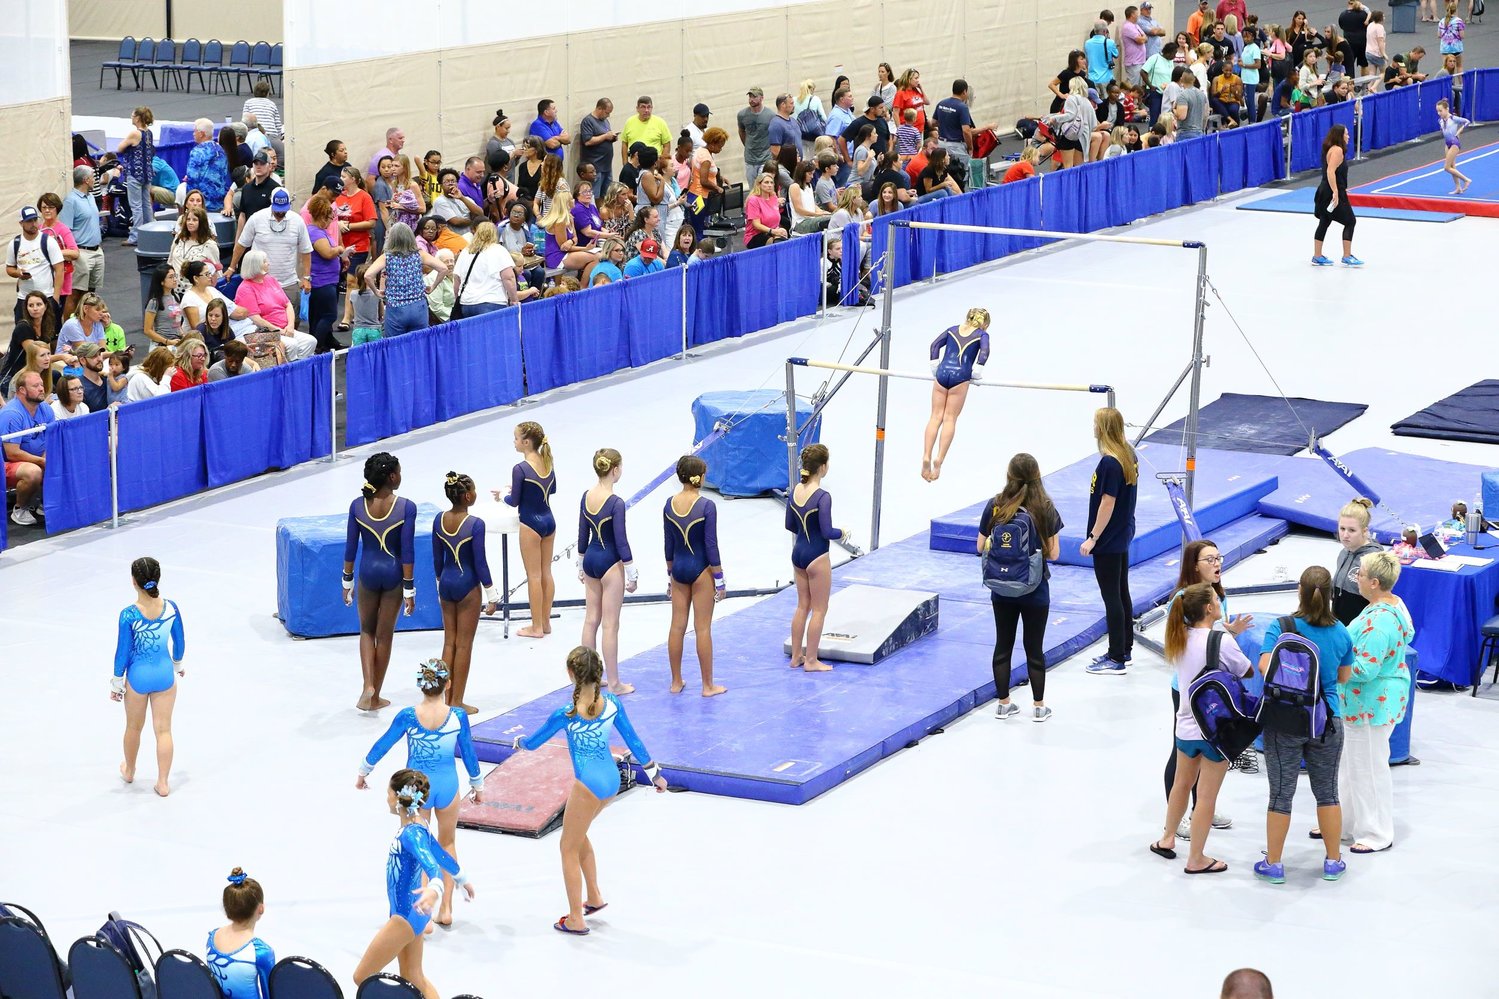 The Bounders Beach Bash gymnastics meet was the first event ever hosted in the new facility at the Foley Event Center when it opened in 2017. This weekend it will celebrate its fifth anniversary of being held in Foley.